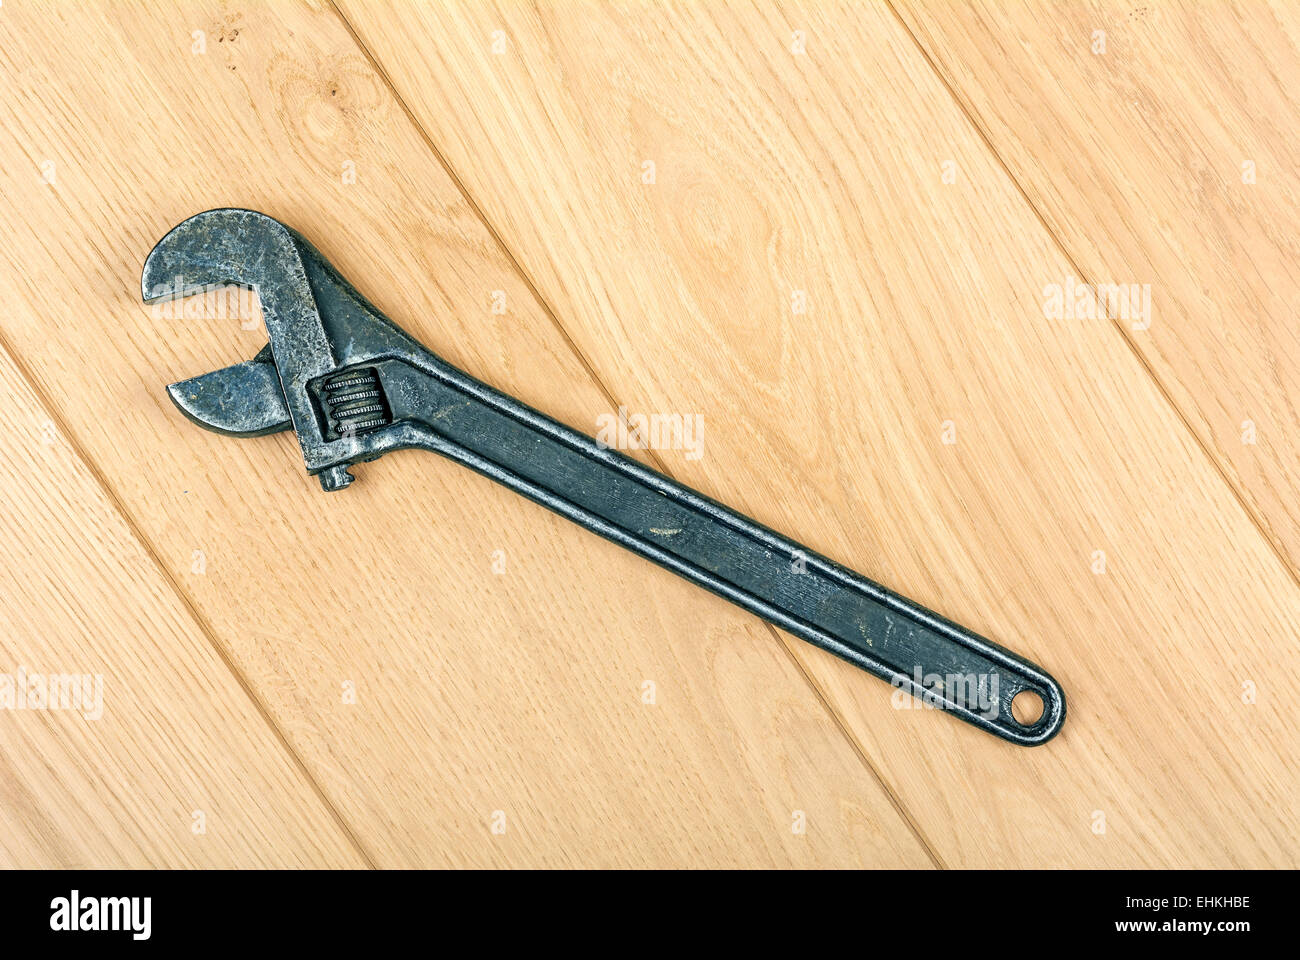 adjustable wrench embossed on the wooden floor Stock Photo